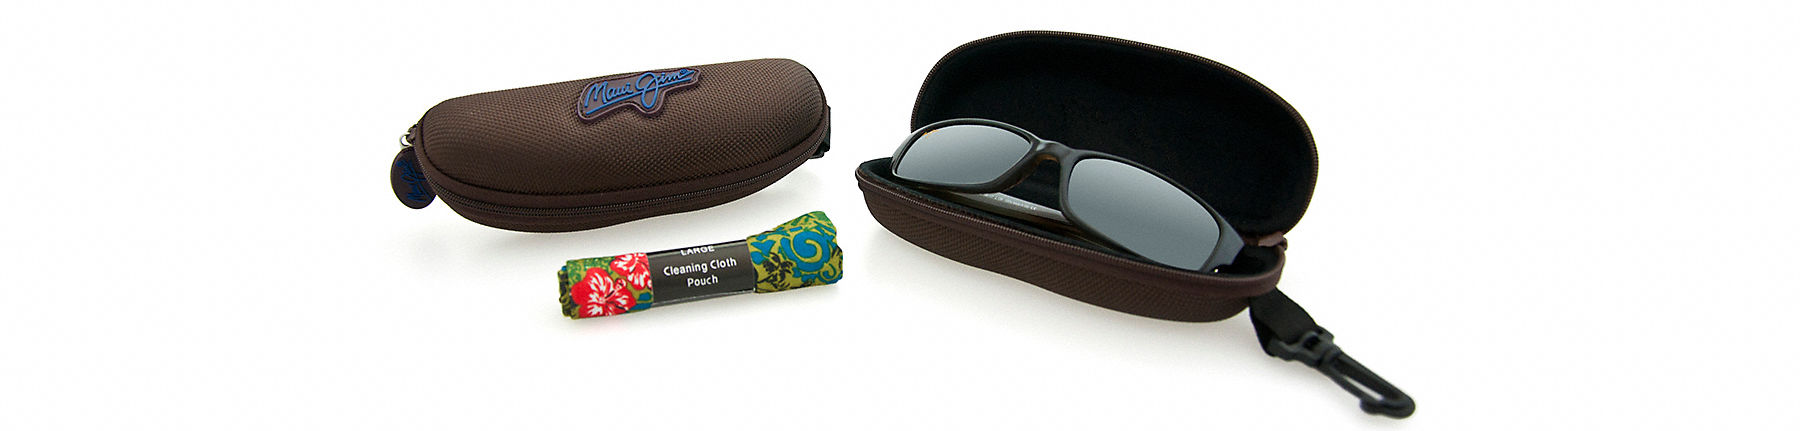 The Best Way to Clean Maui Jim Sunglasses